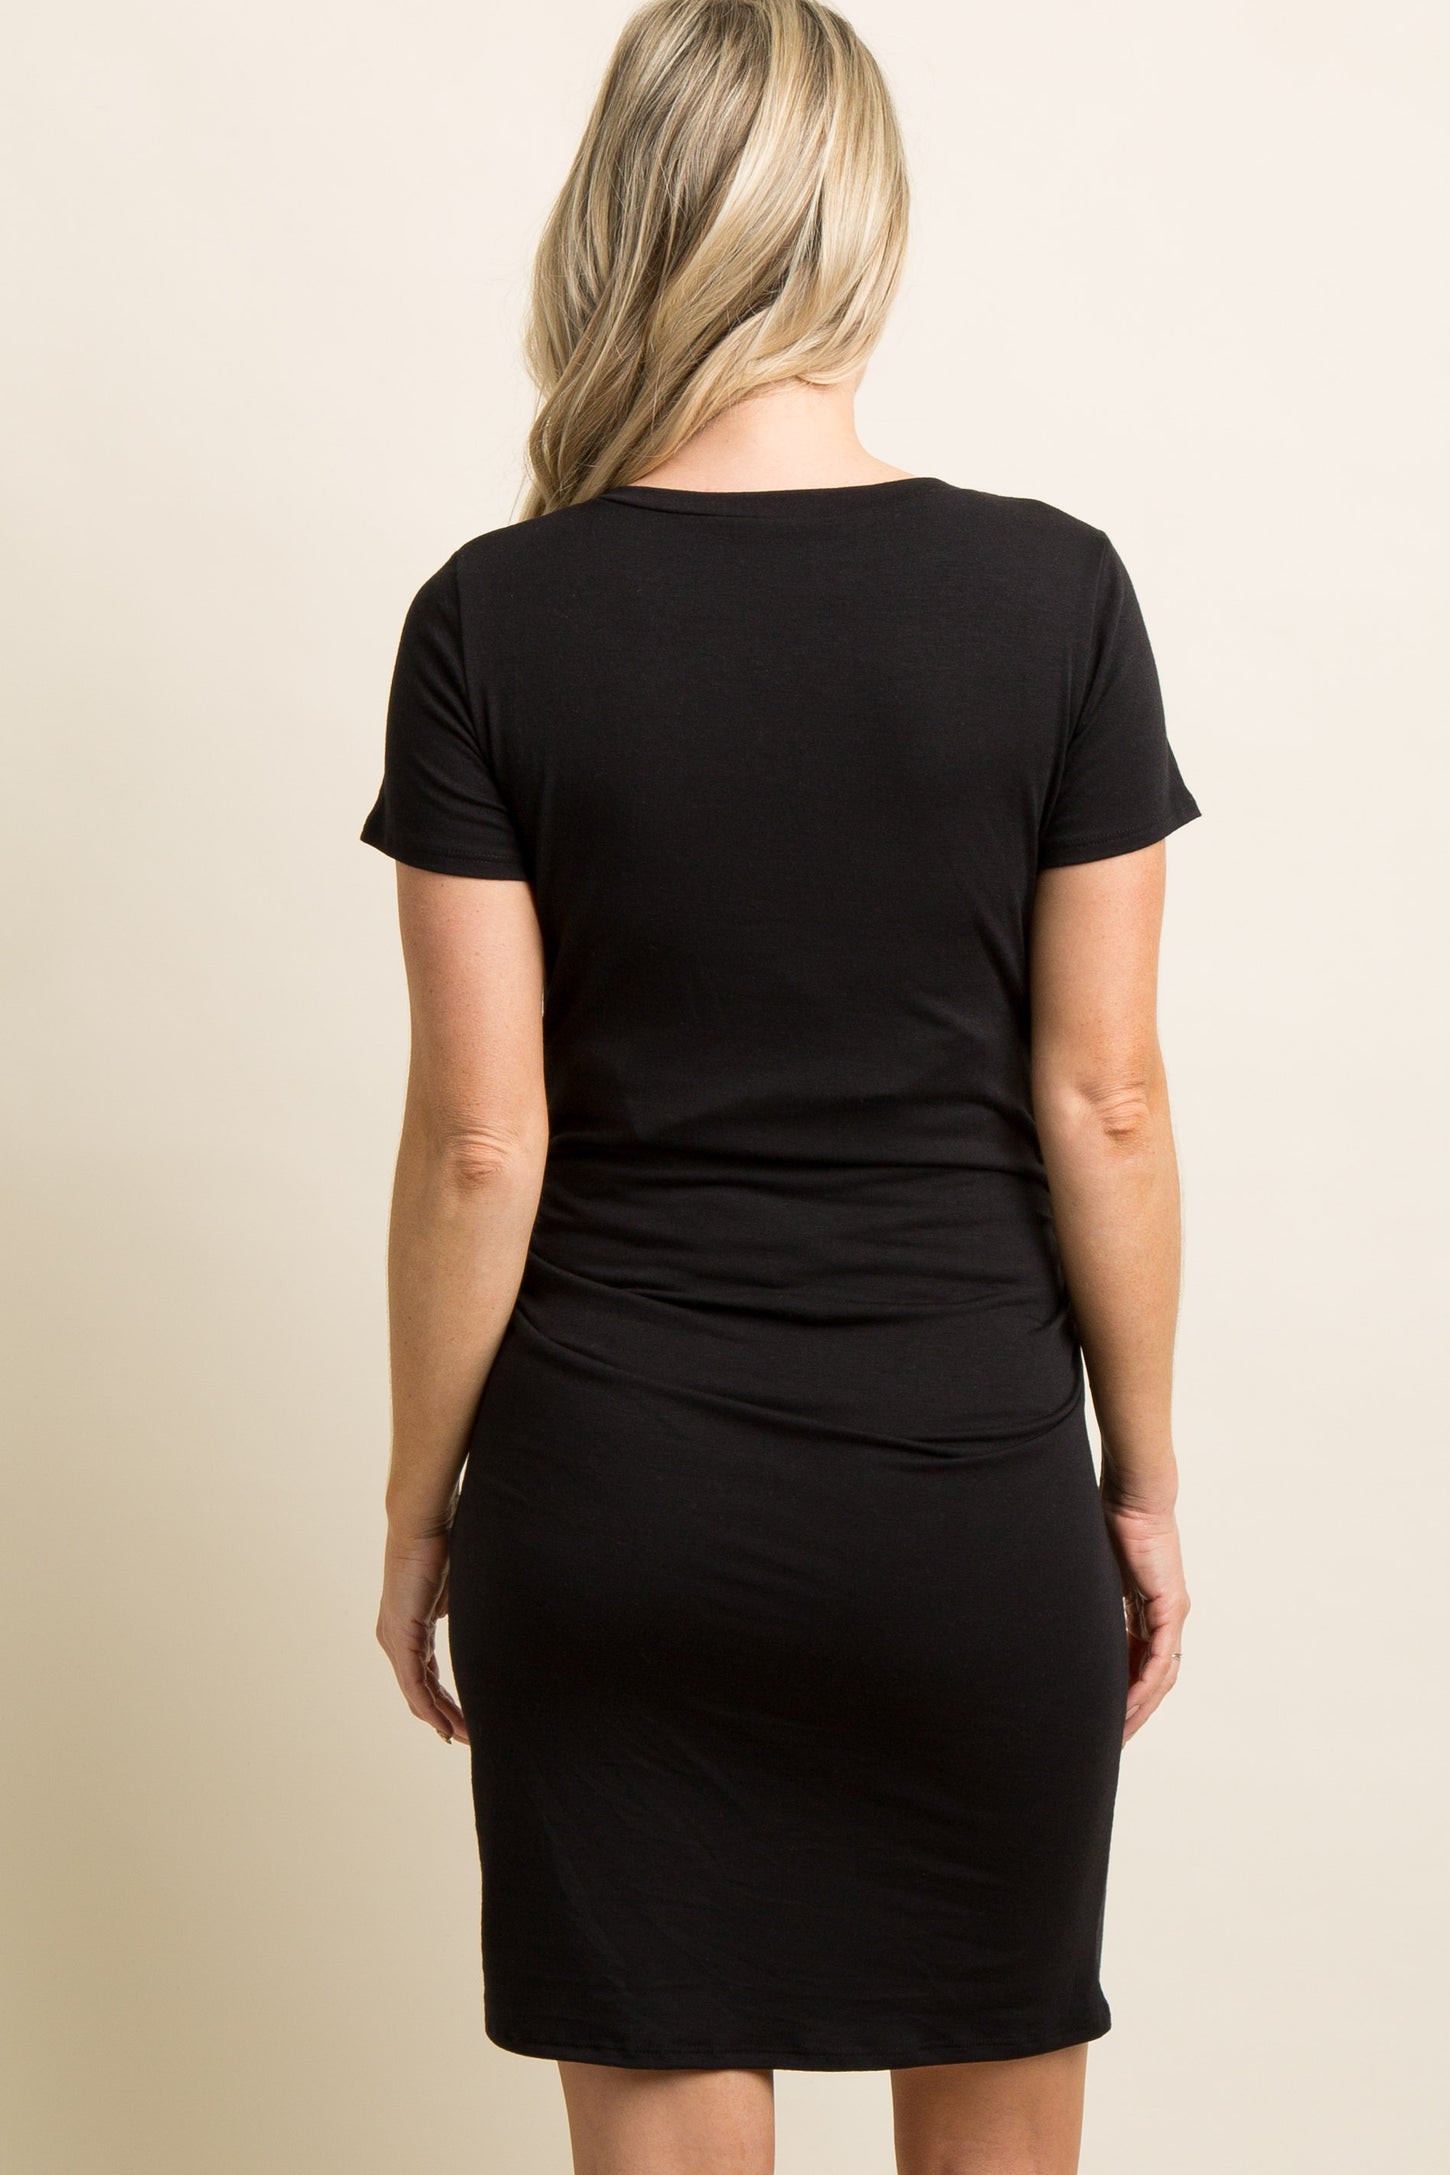 PinkBlush Black Basic Ruched Fitted Maternity Dress